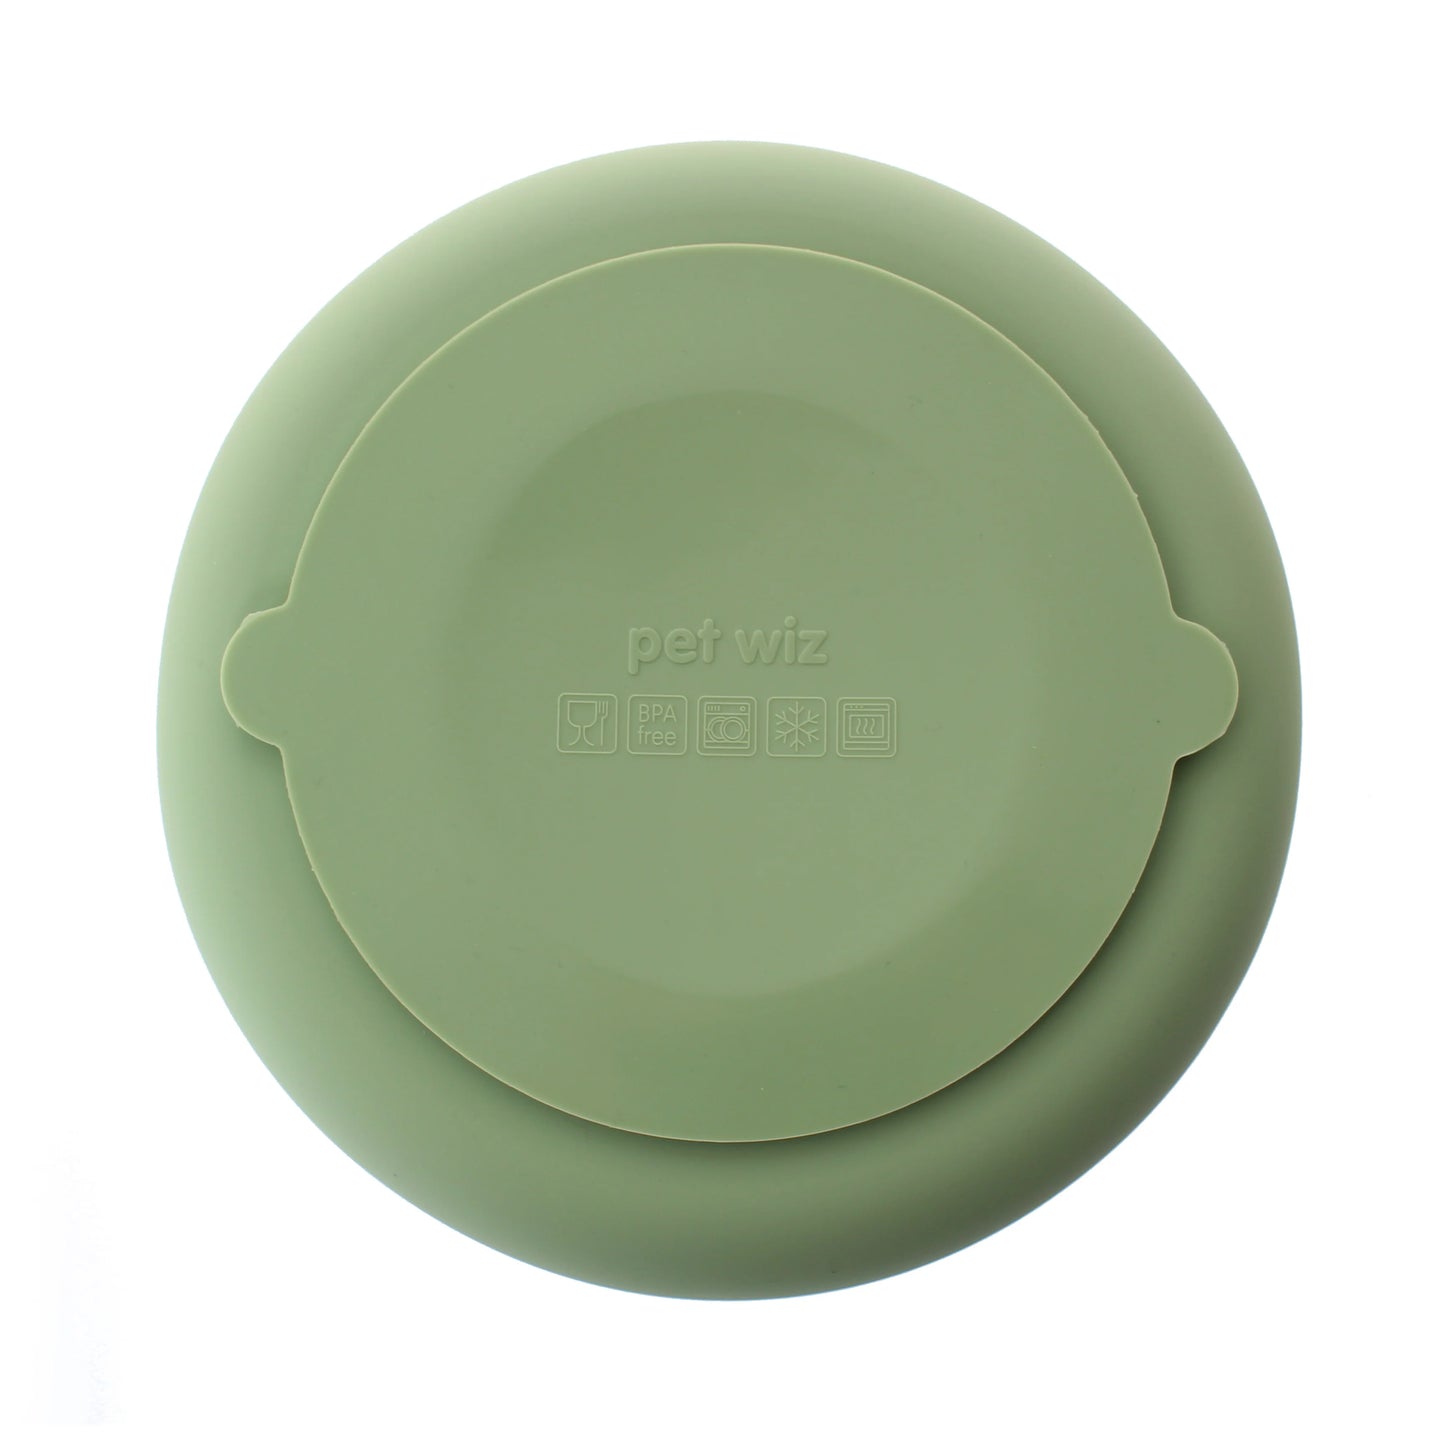 Pet Wiz Silicone Slow Feeder Bowl With Suction Base - Peach